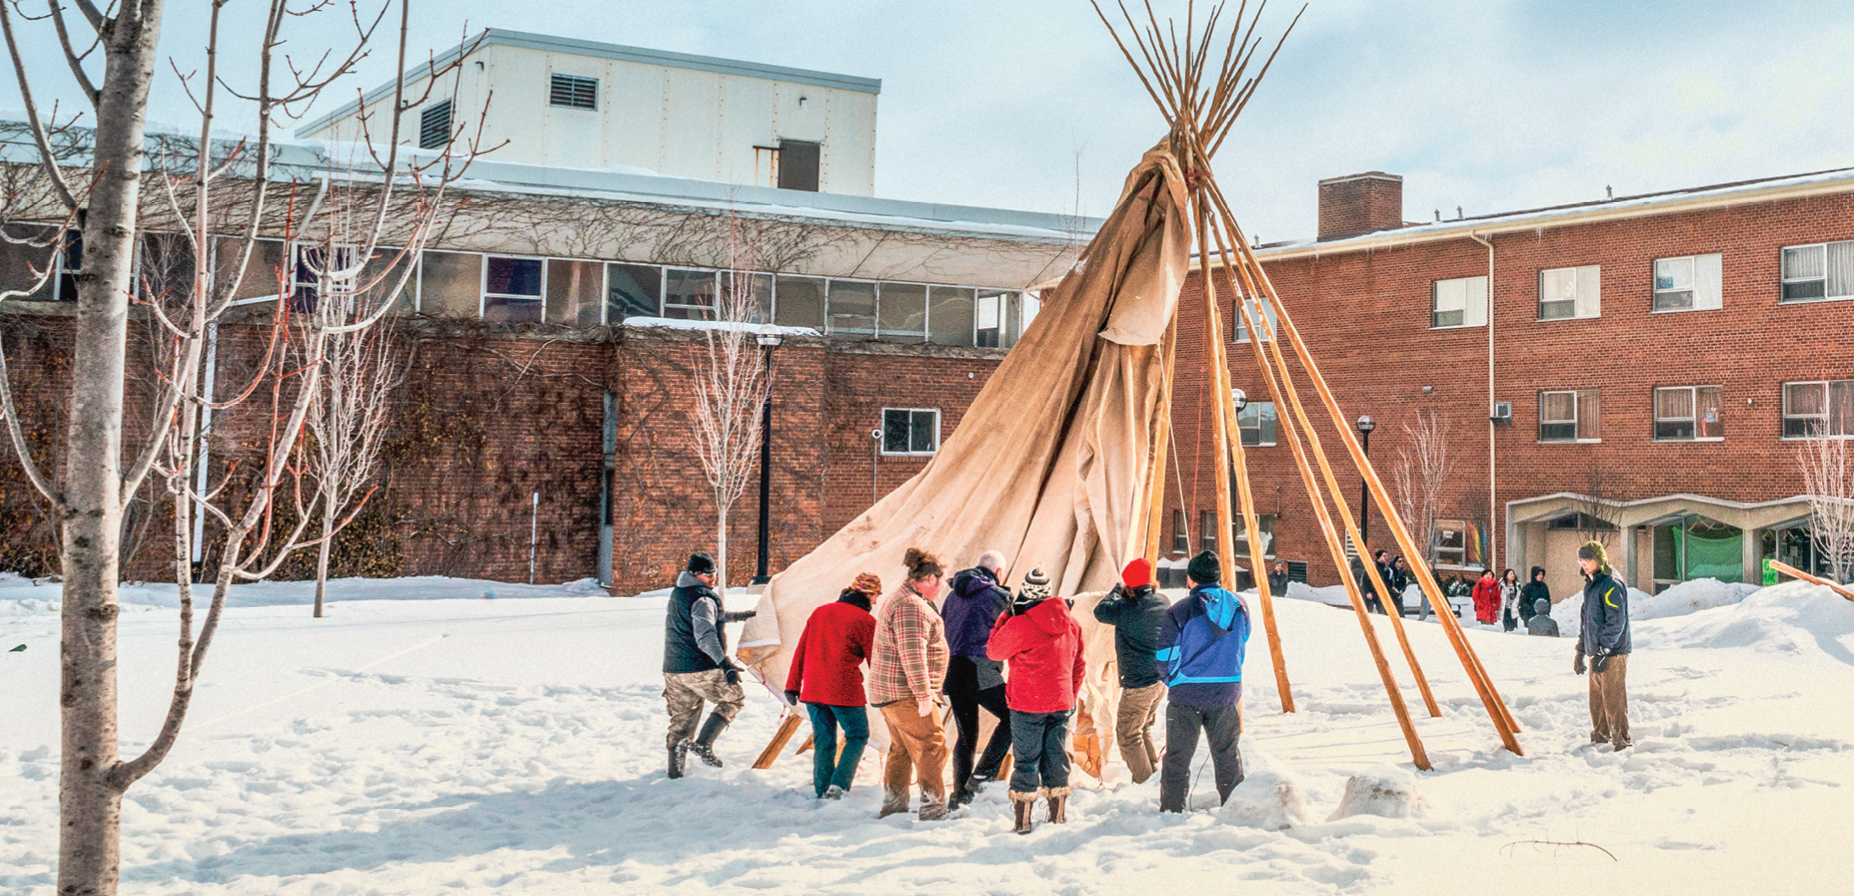 Indigenous Studies (BA): Engage with key socio-cultural issues facing Canada and the world.